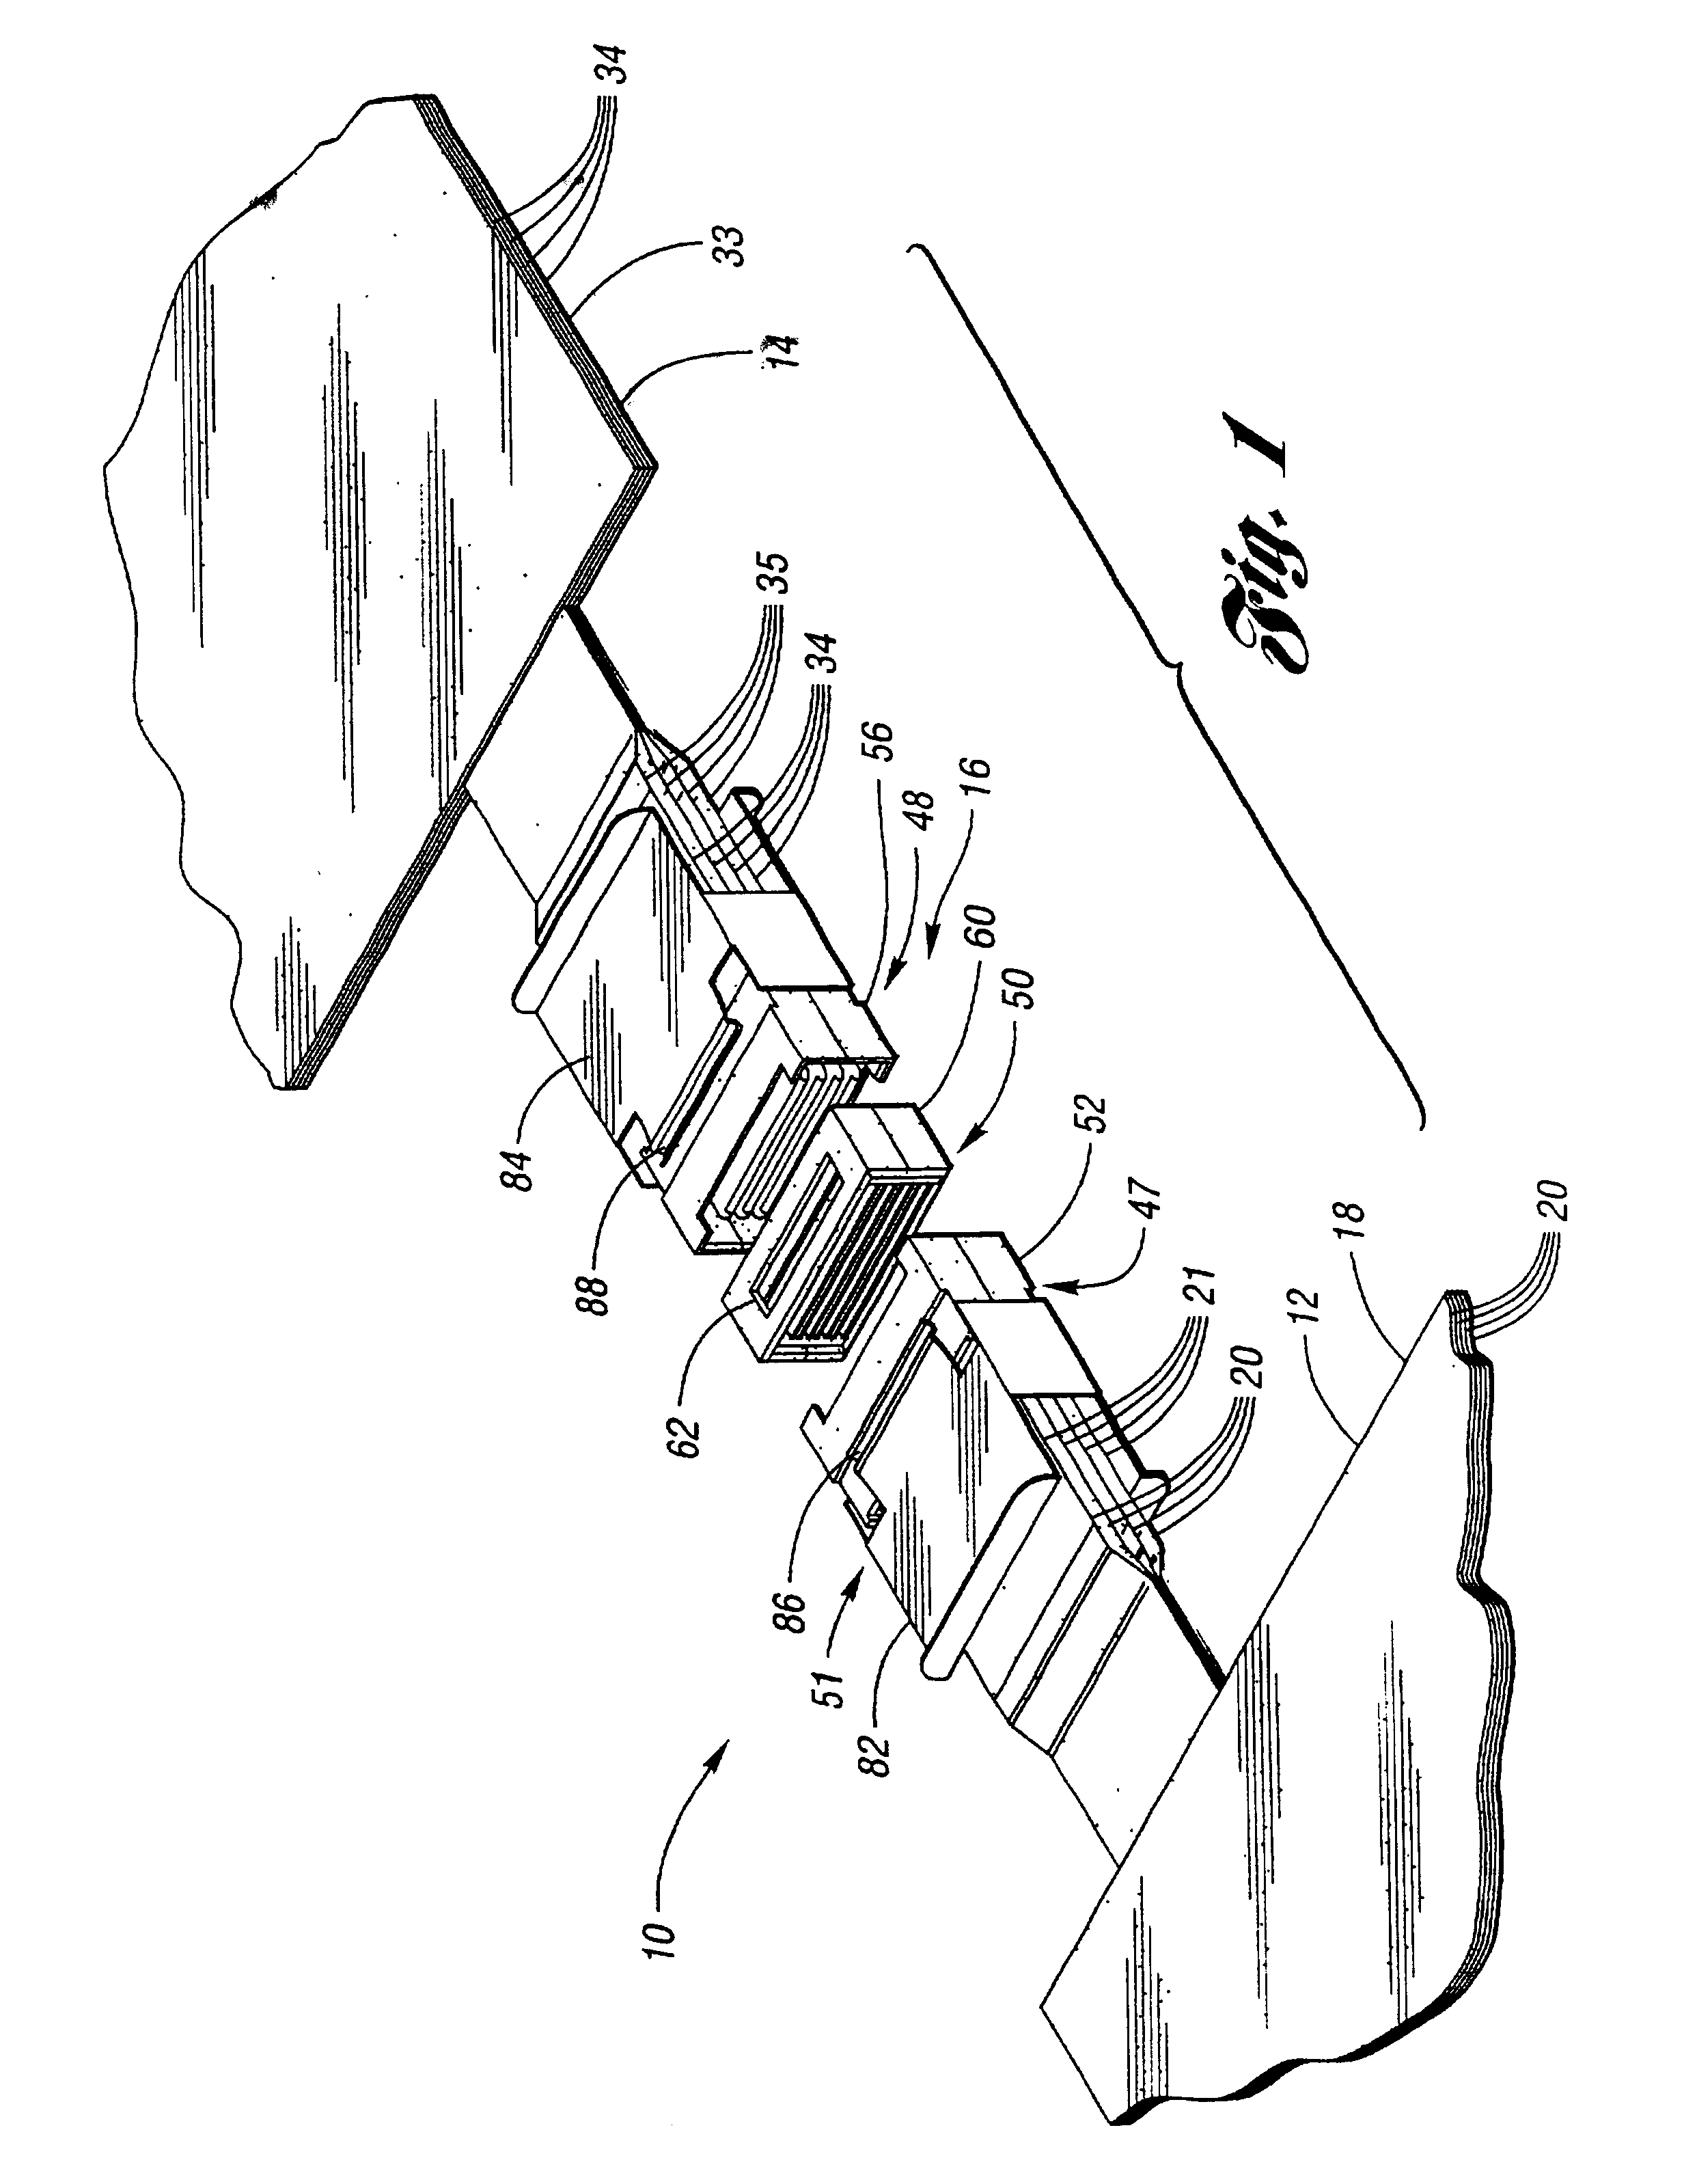 Method of forming alignment features for conductive devices